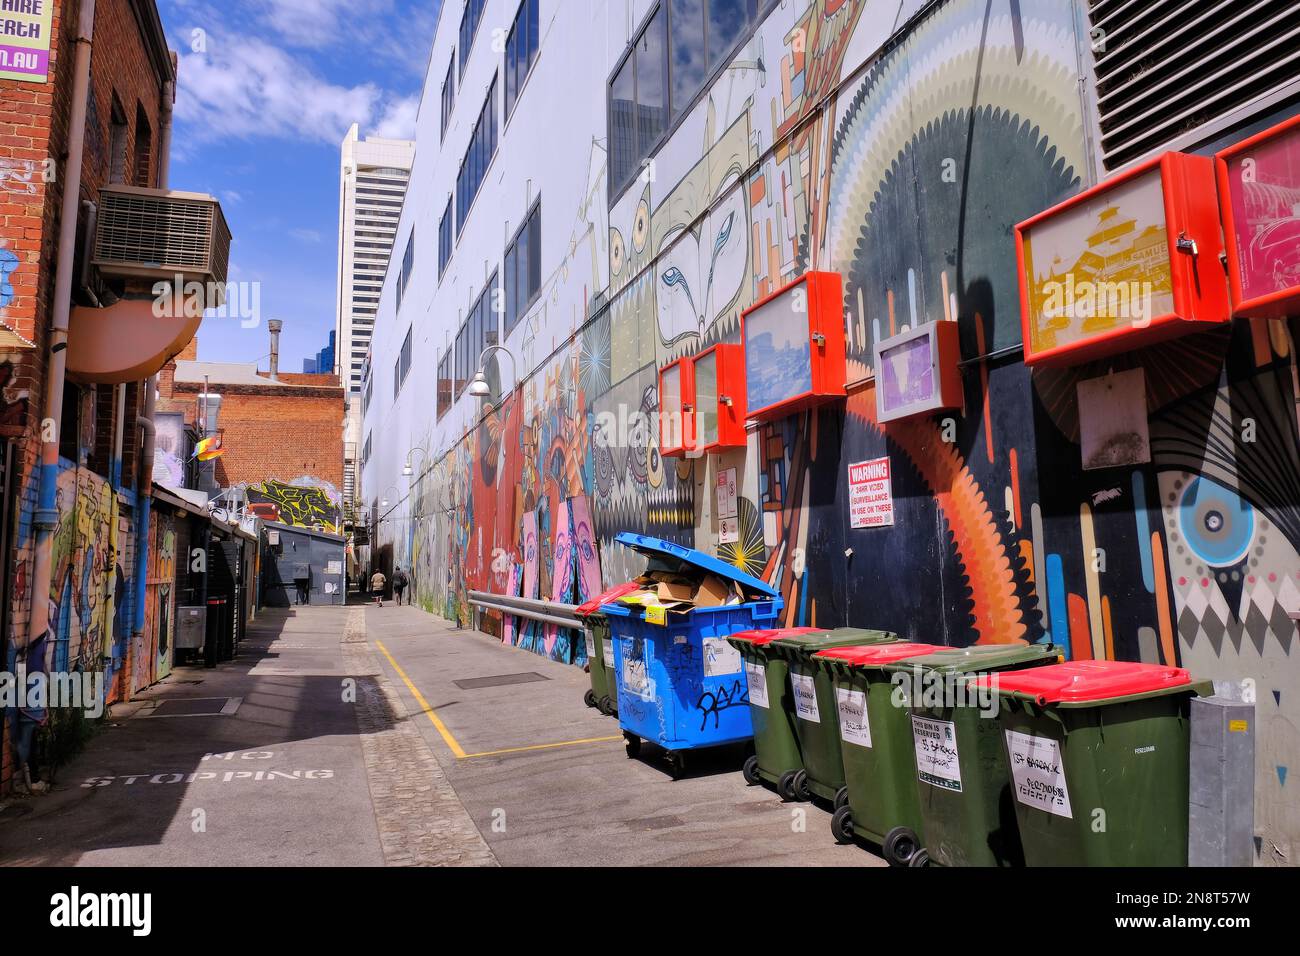 Perth: Street art and rubbish bins along Grand Lane with view to view to high-rise buildings in Perth central business district, Western Australia Stock Photo